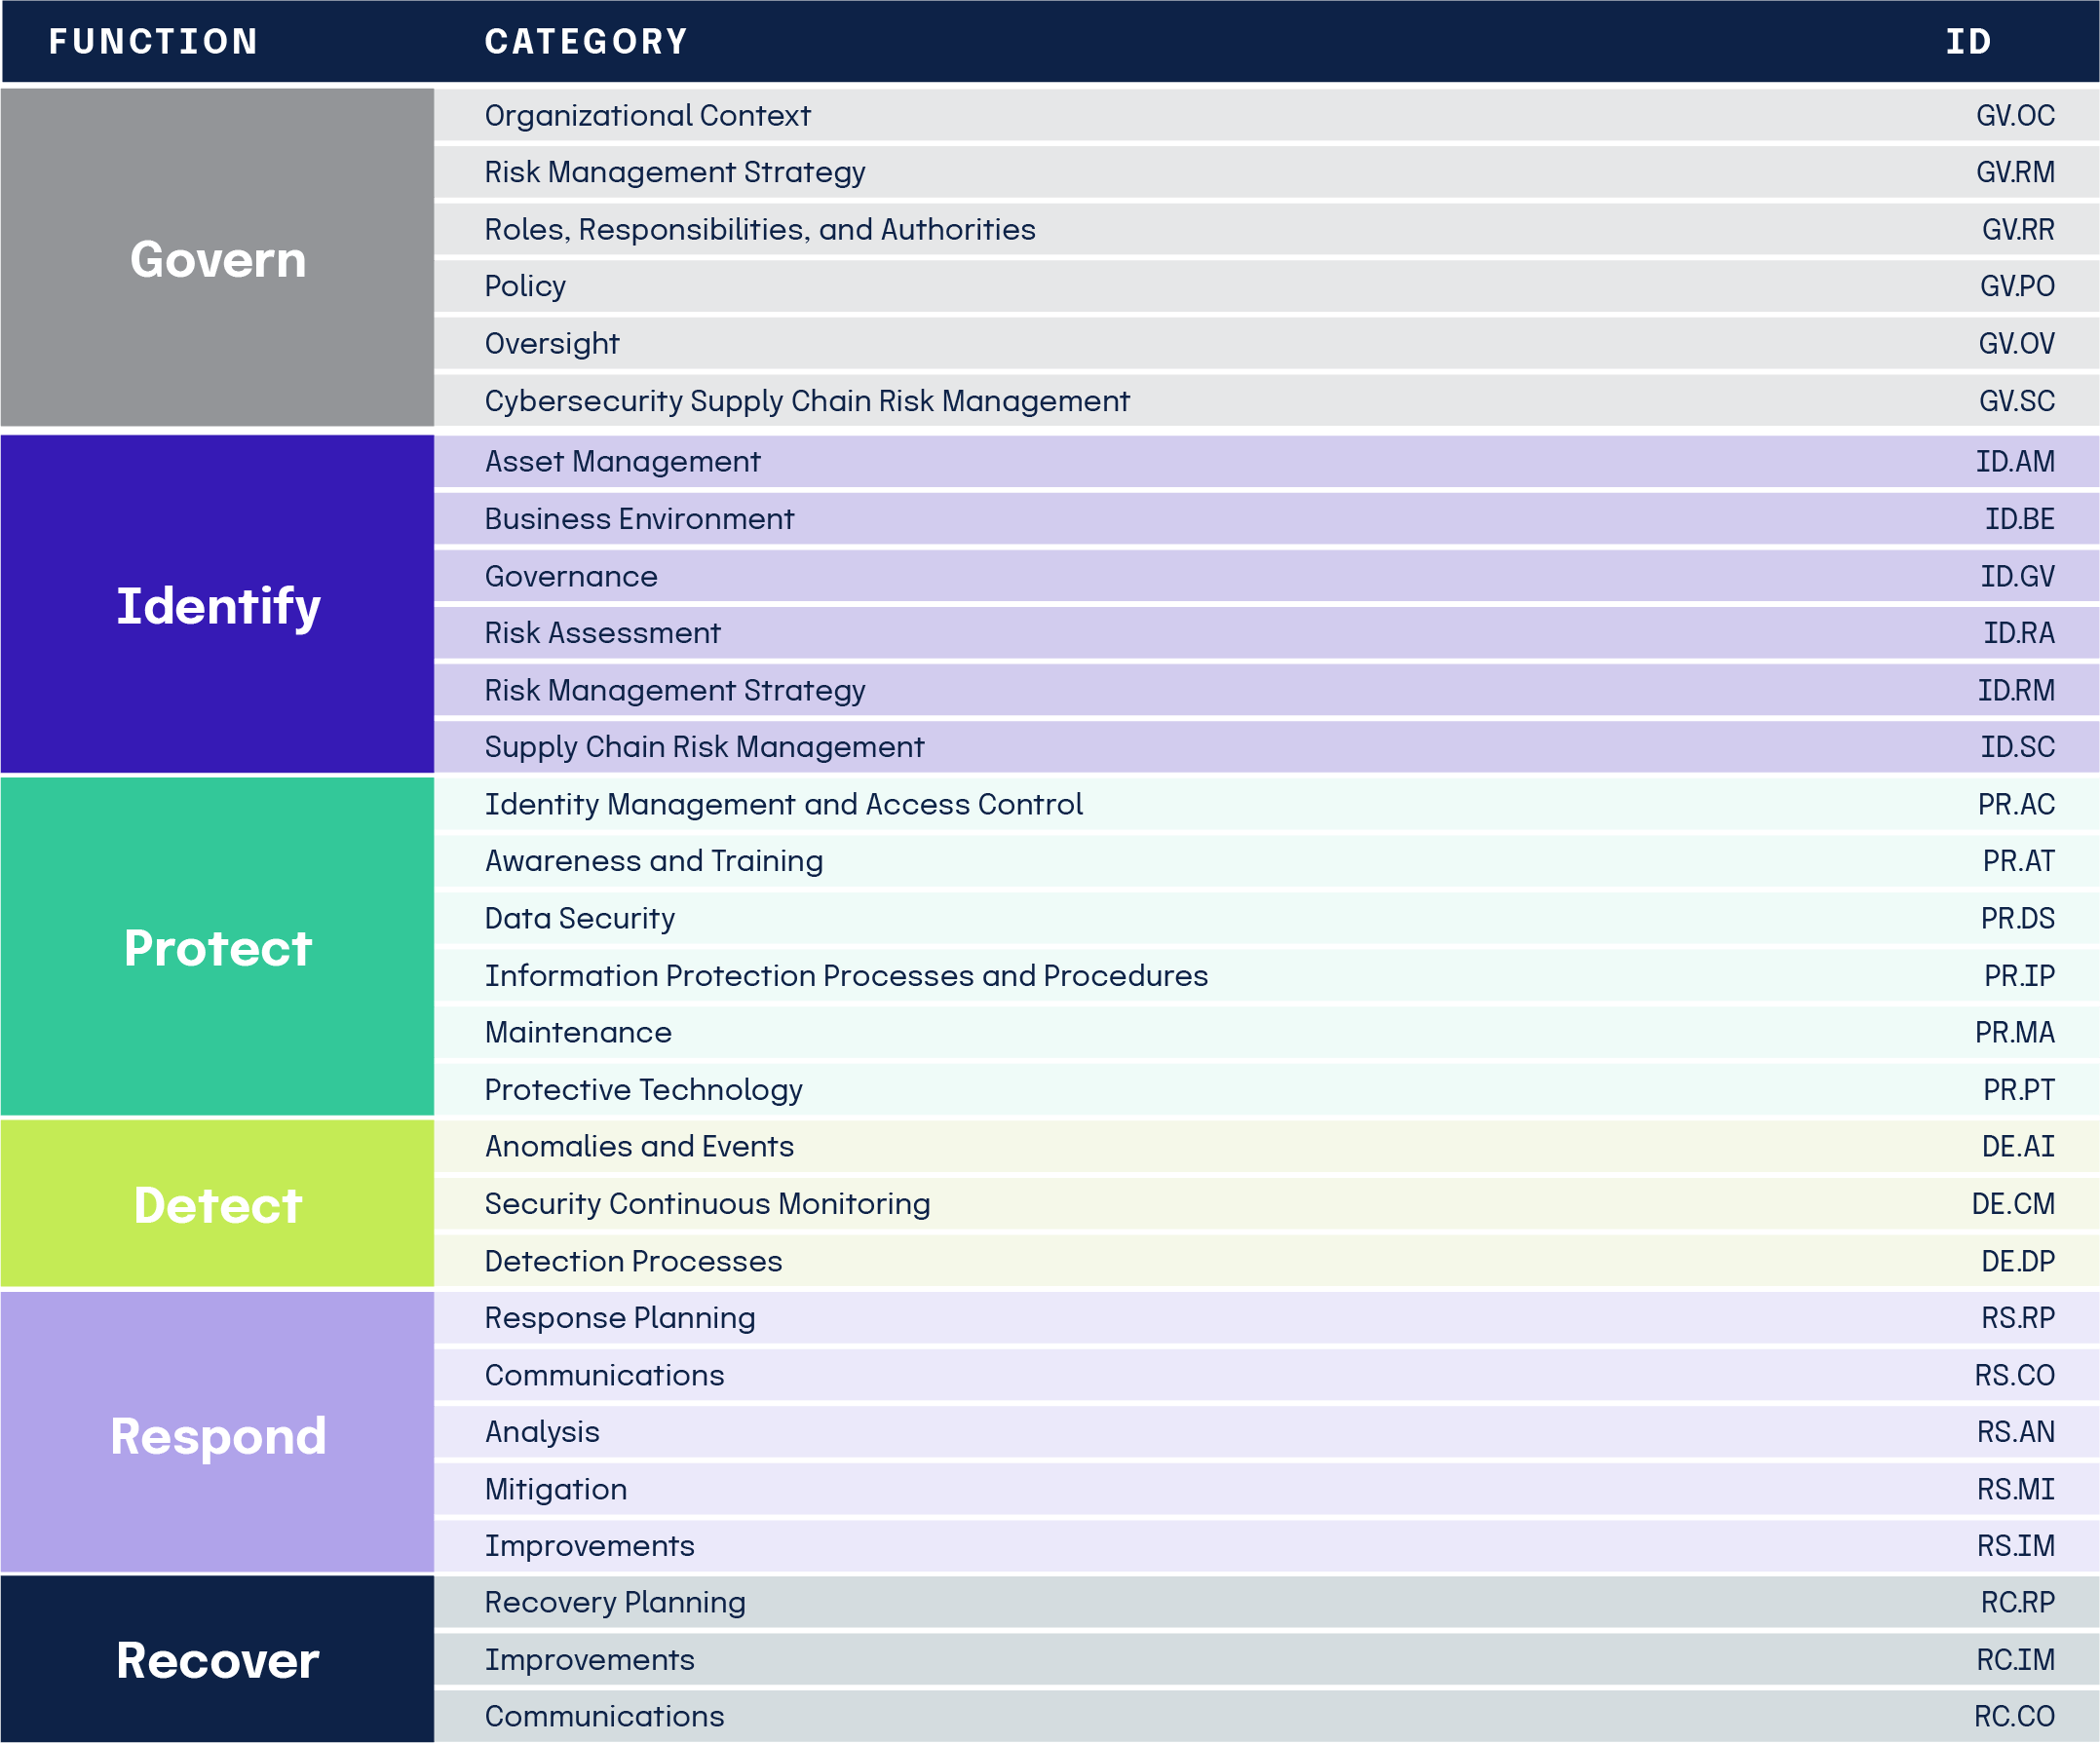 The five functions break out into 23 Categories which contain specific outcome driven statements that provide consideration for cr eating or improving a cybersecurity program.